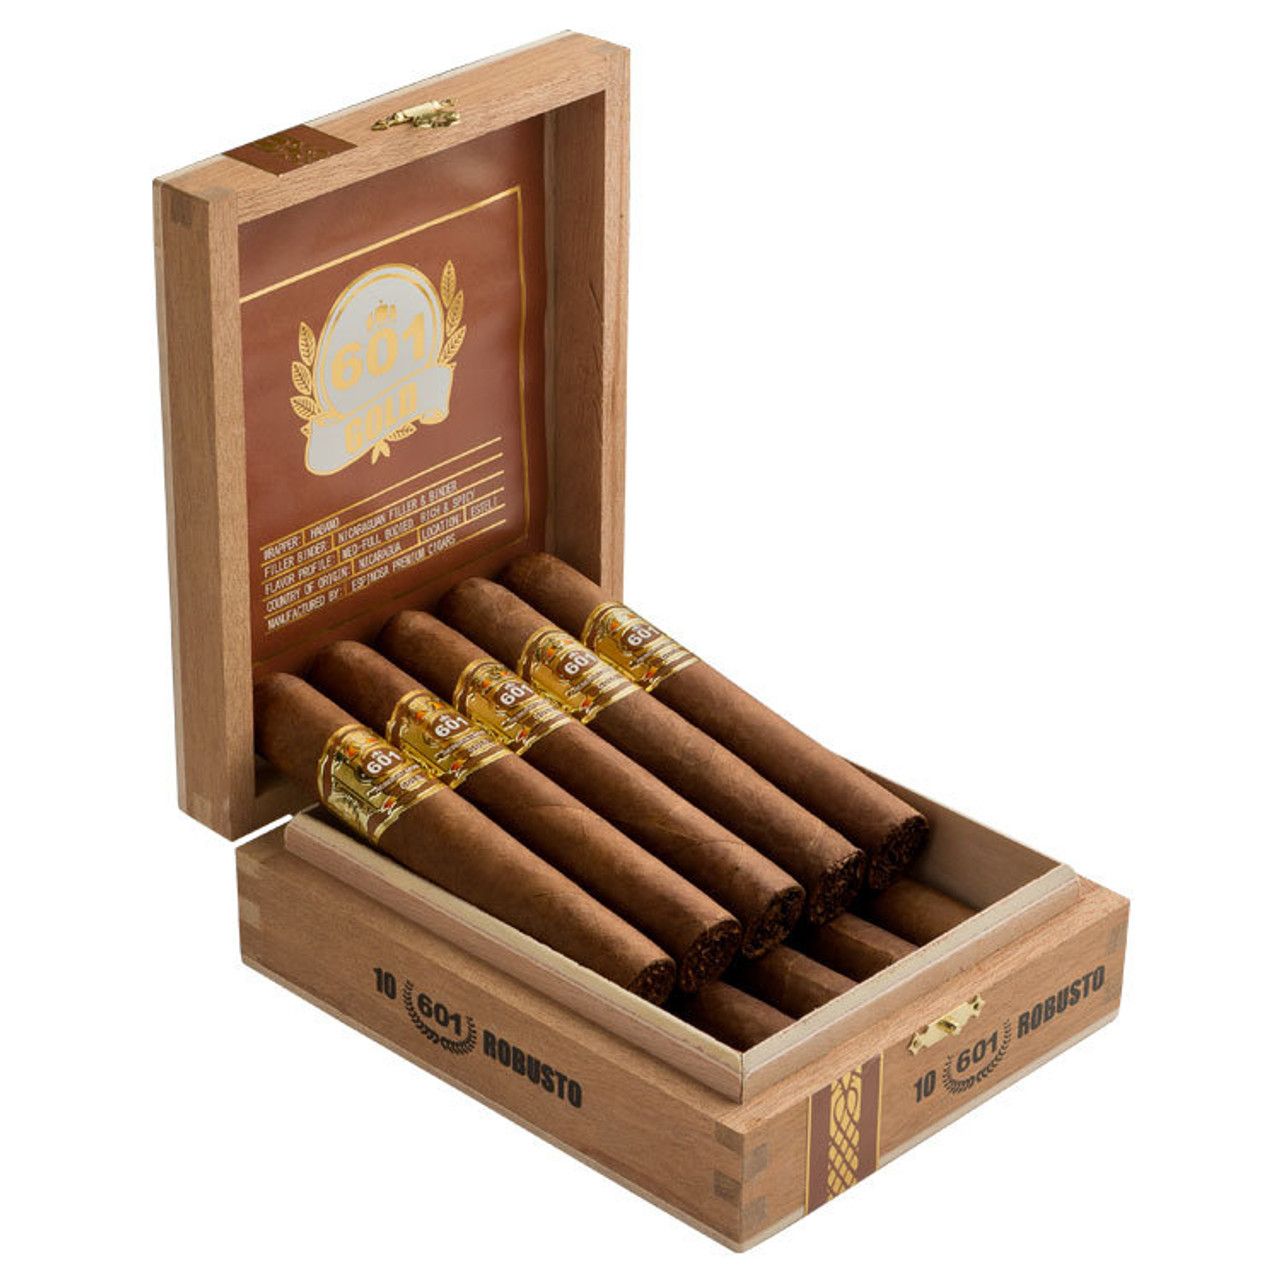 601 Gold Label Robusto Cigars - 5 x 50 (Box of 10) Open